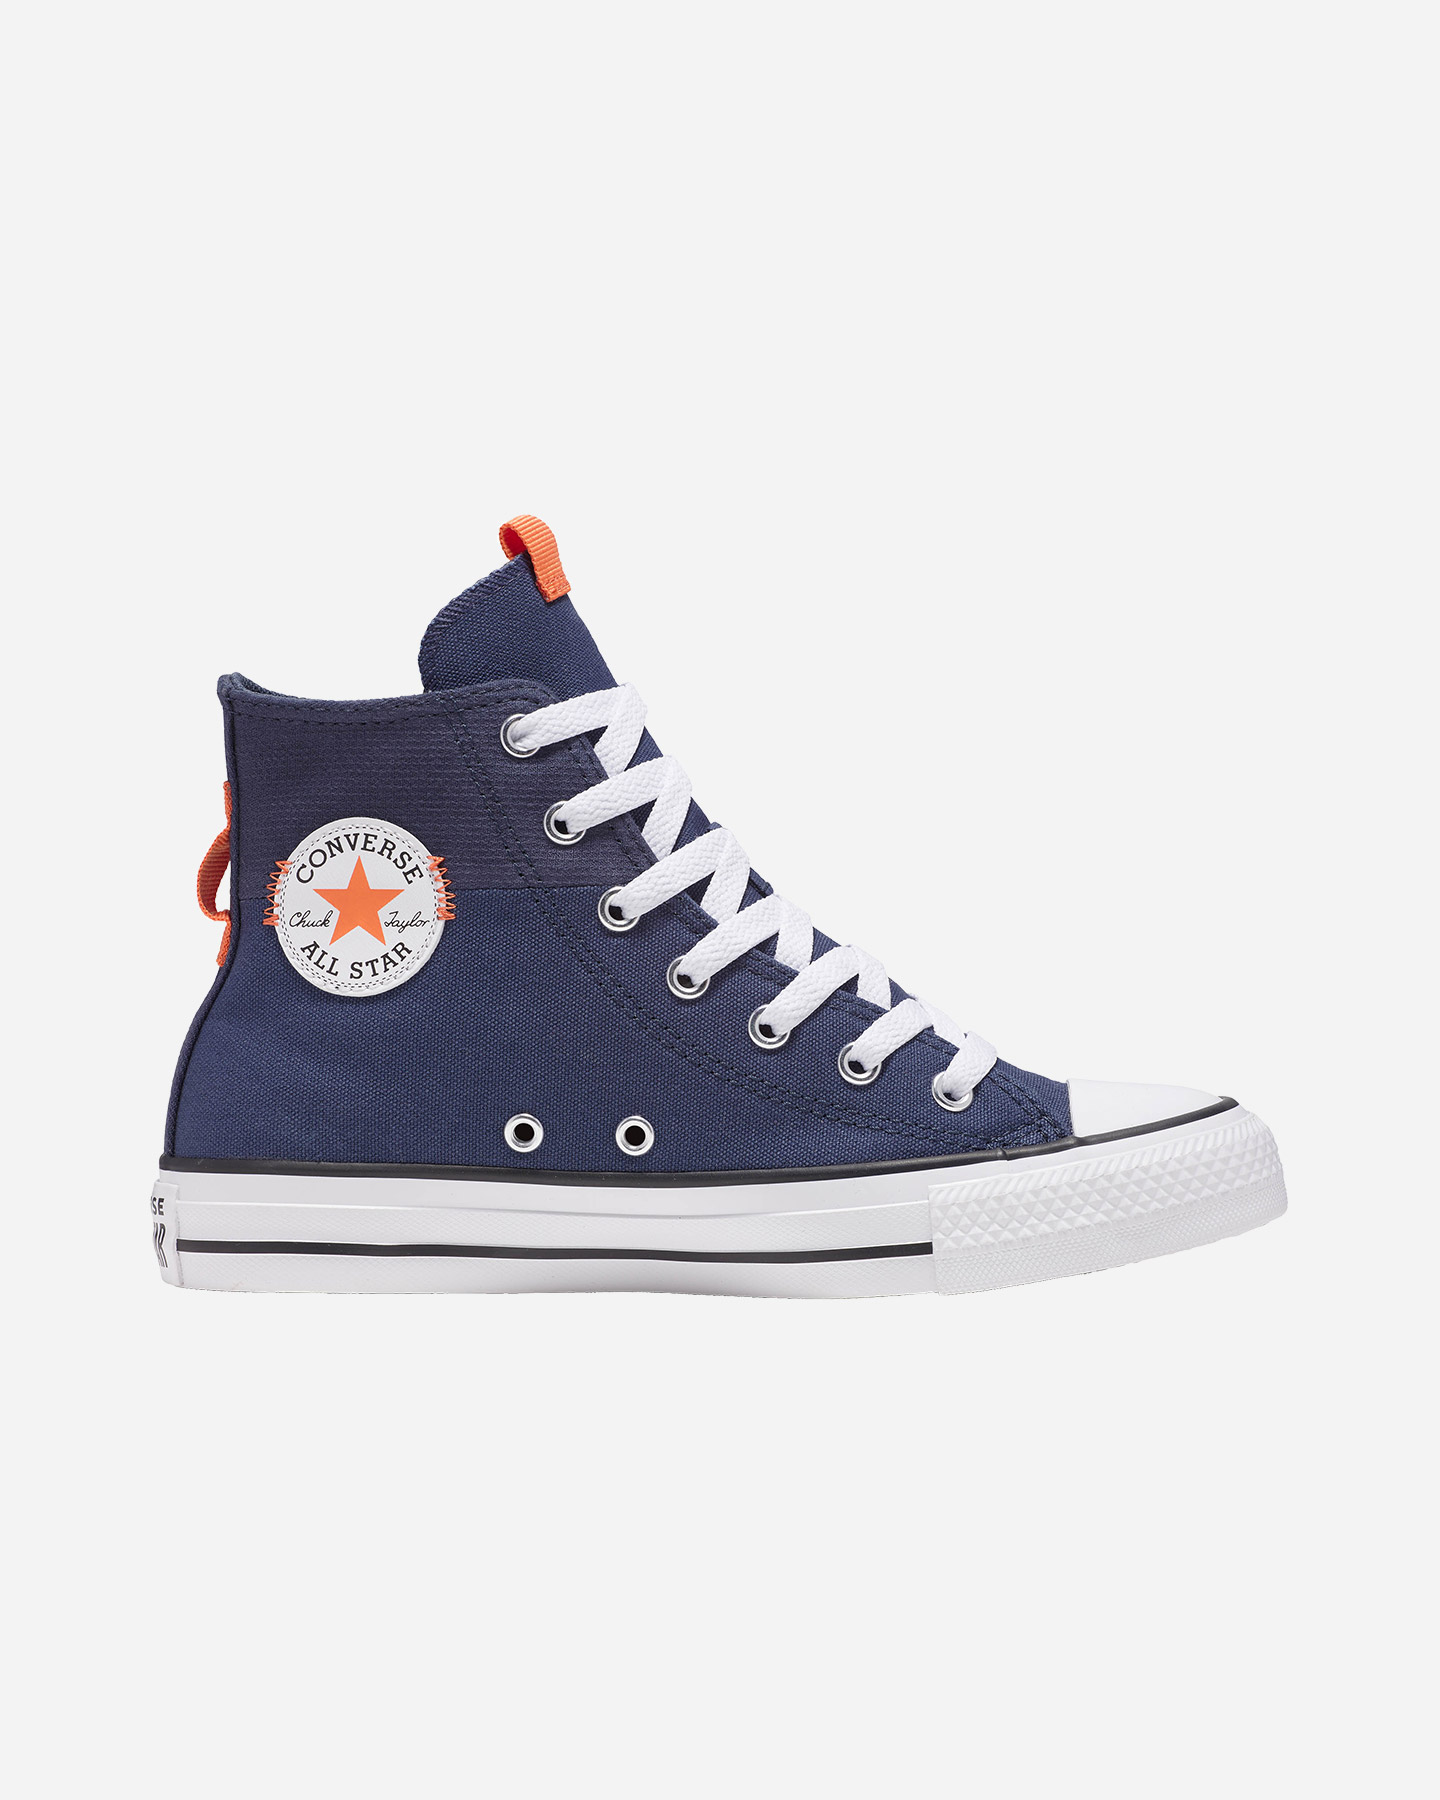 Image of Converse Chuck Taylor All Star High Gs Jr - Scarpe Sneakers